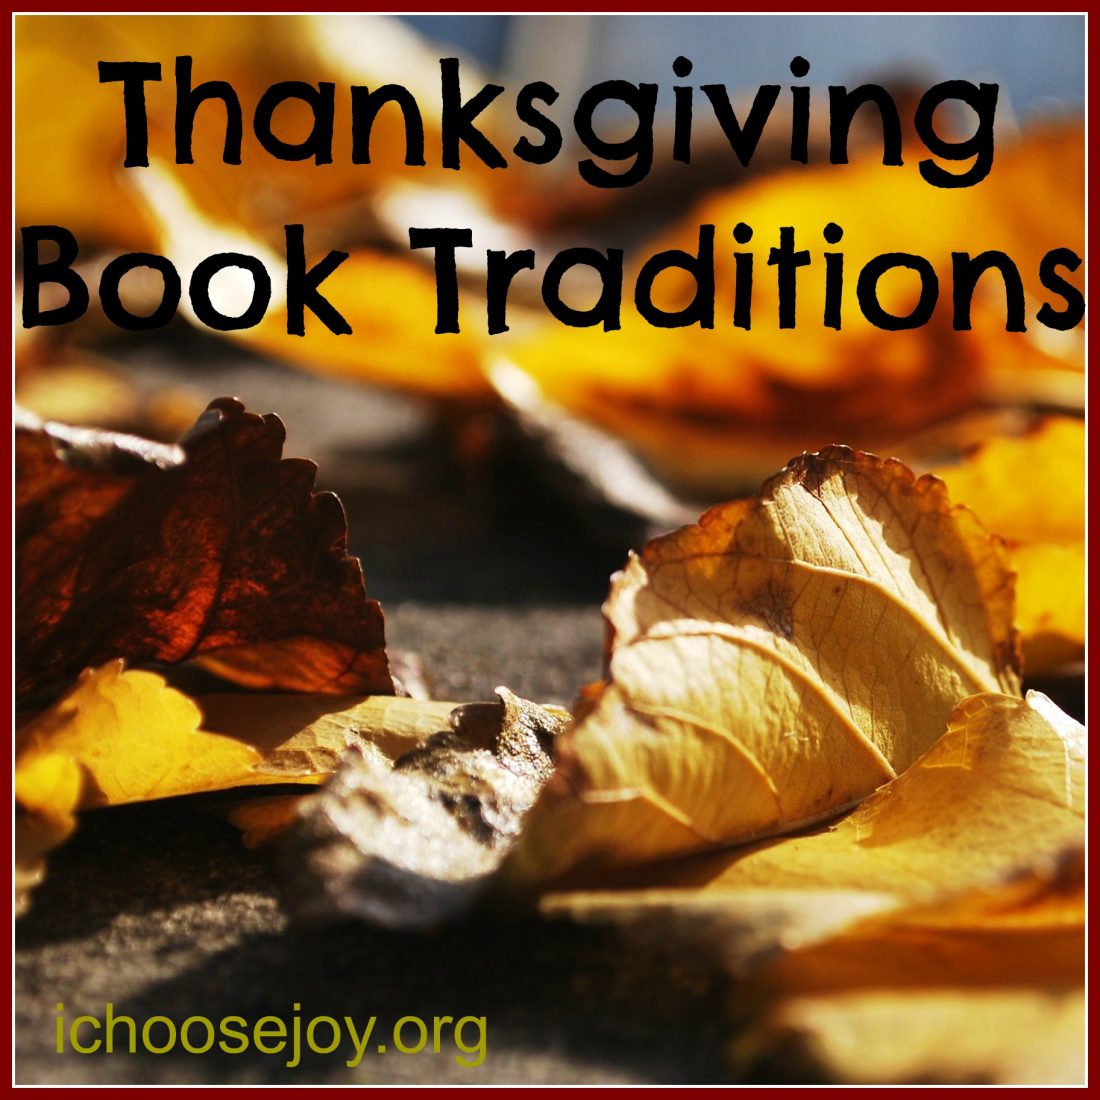 Thanksgiving Book Traditions, fun books we read for Thanksgiving each year #thanksgiving #thanksgivingbooks #booksforkids